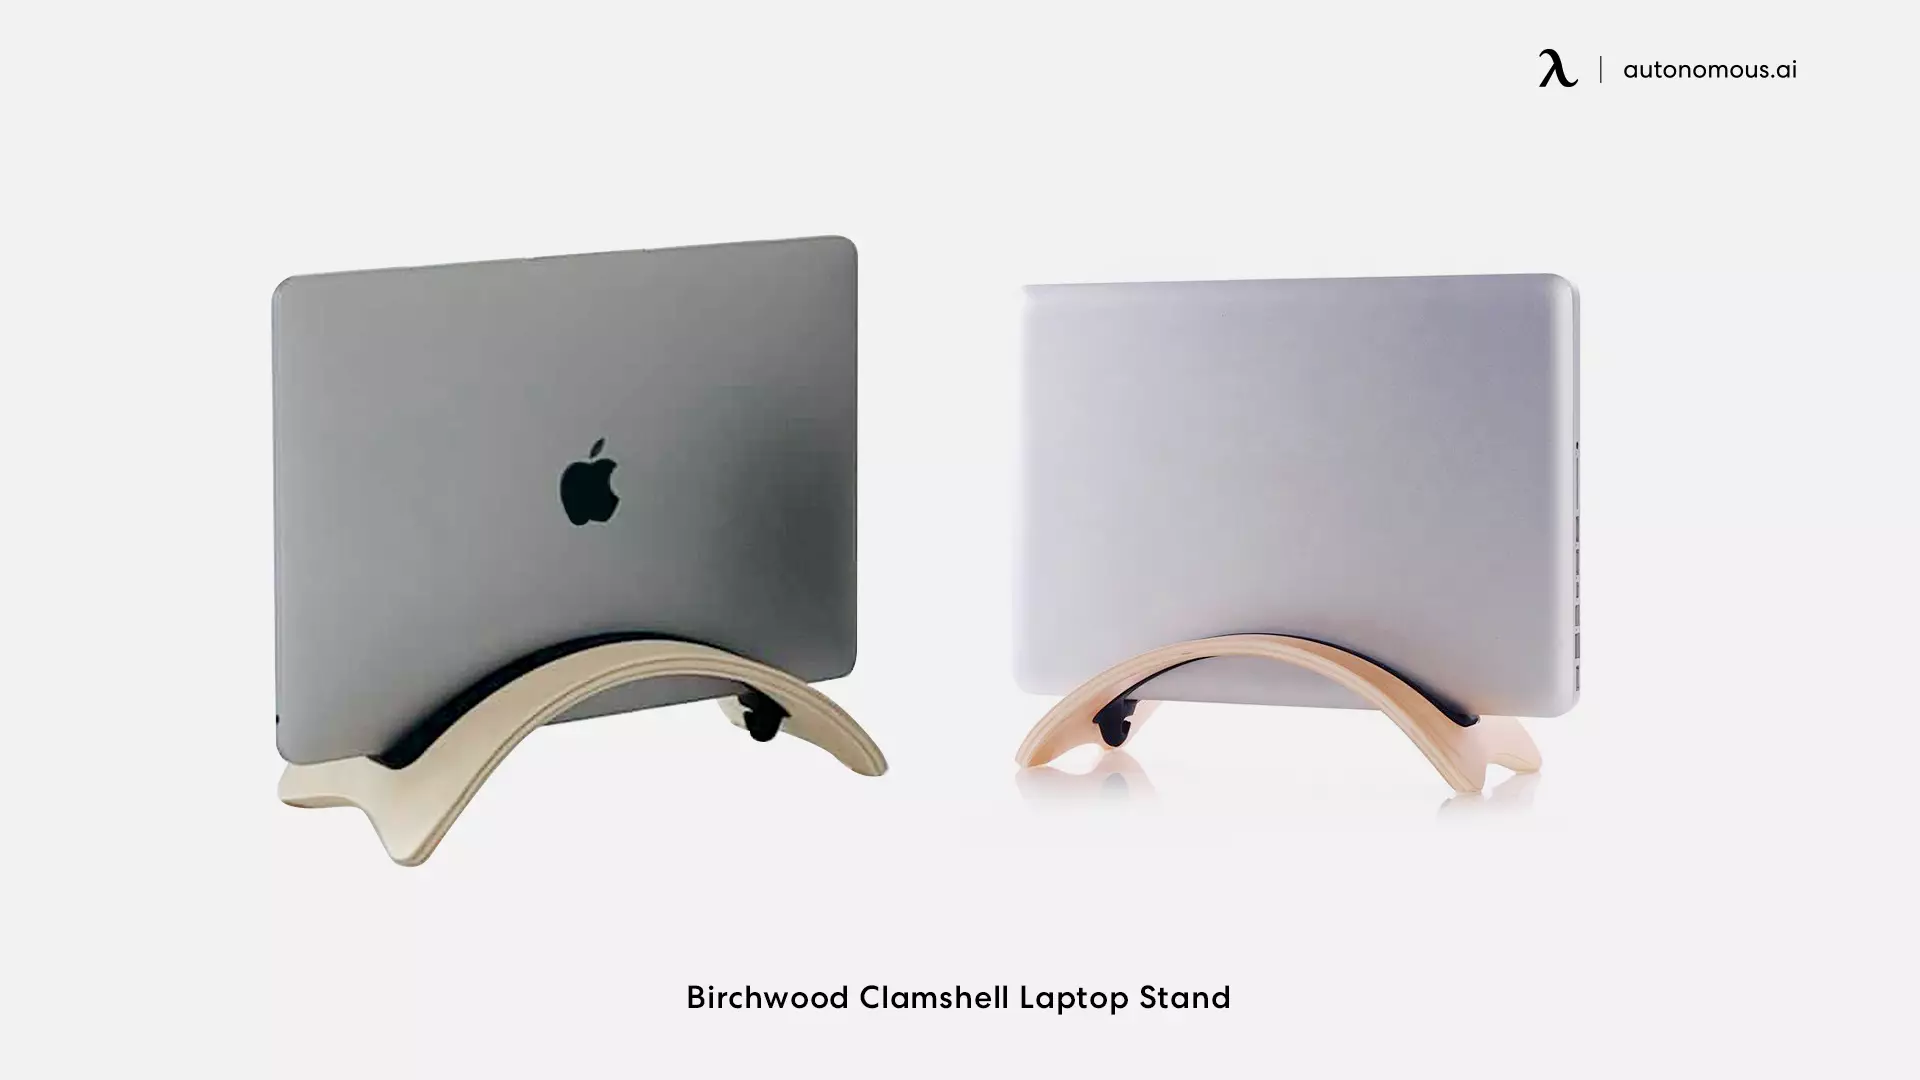 Birchwood Clamshell Laptop Stand Wood desk accessories